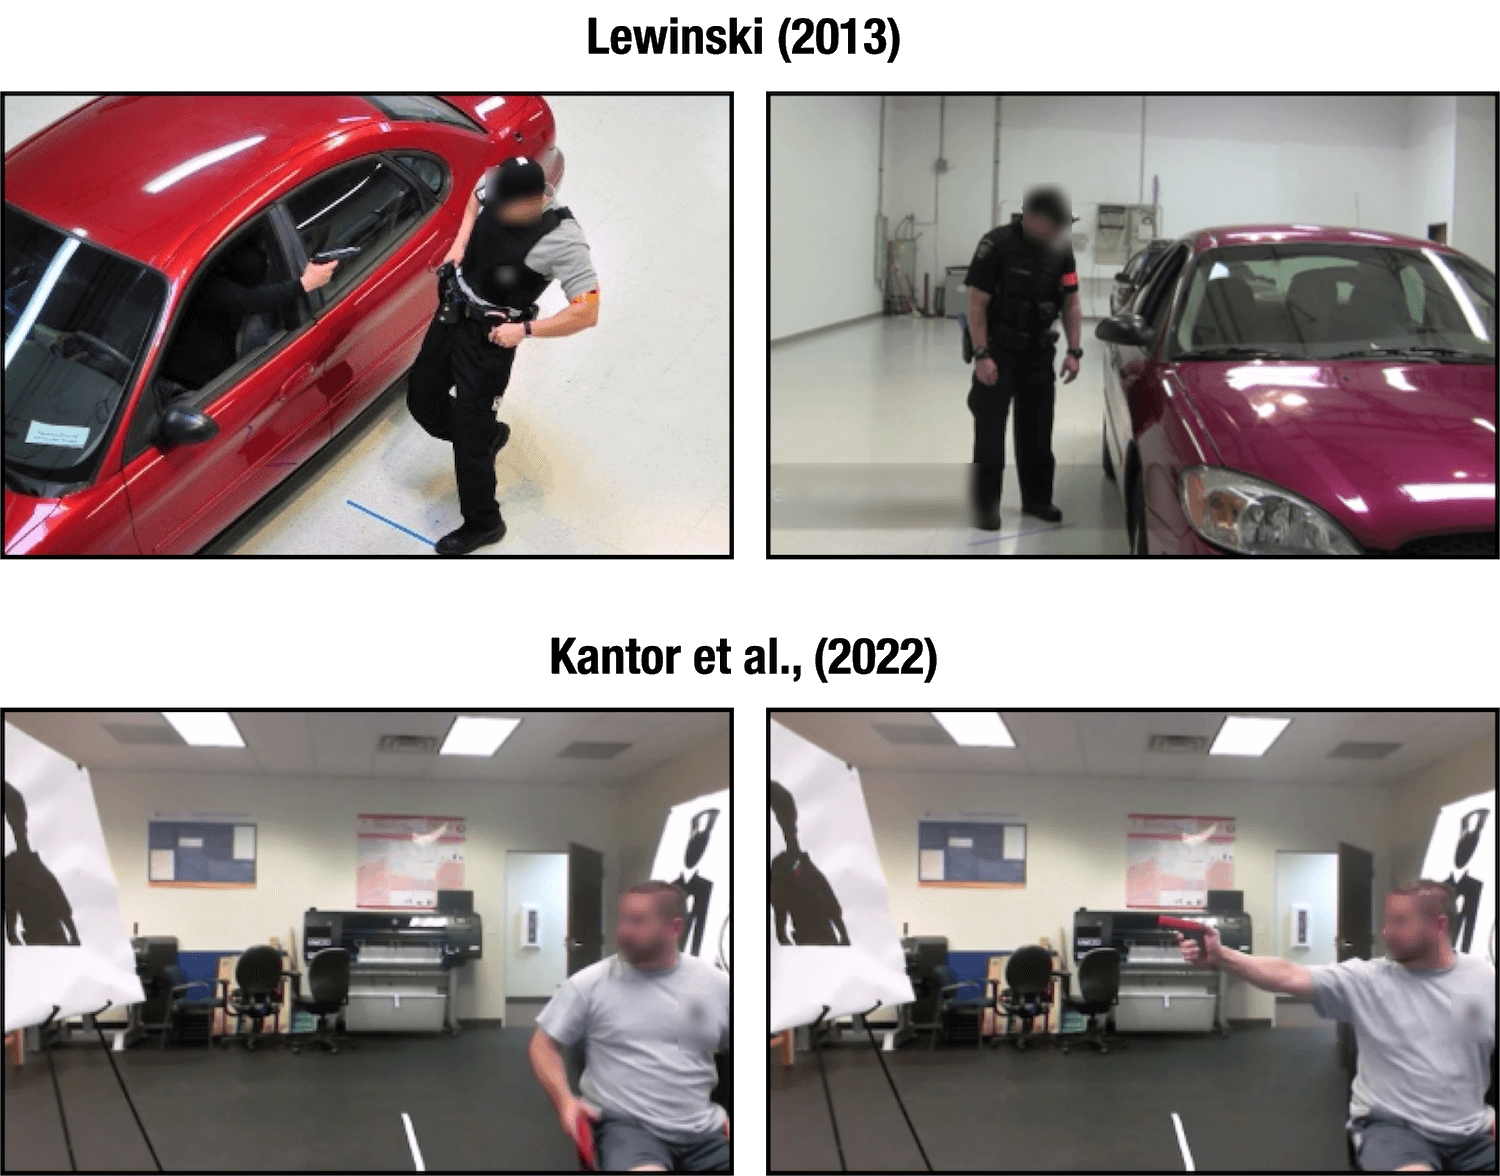 Figure 2. Shooting from the driver-side front from 2013 and 2022